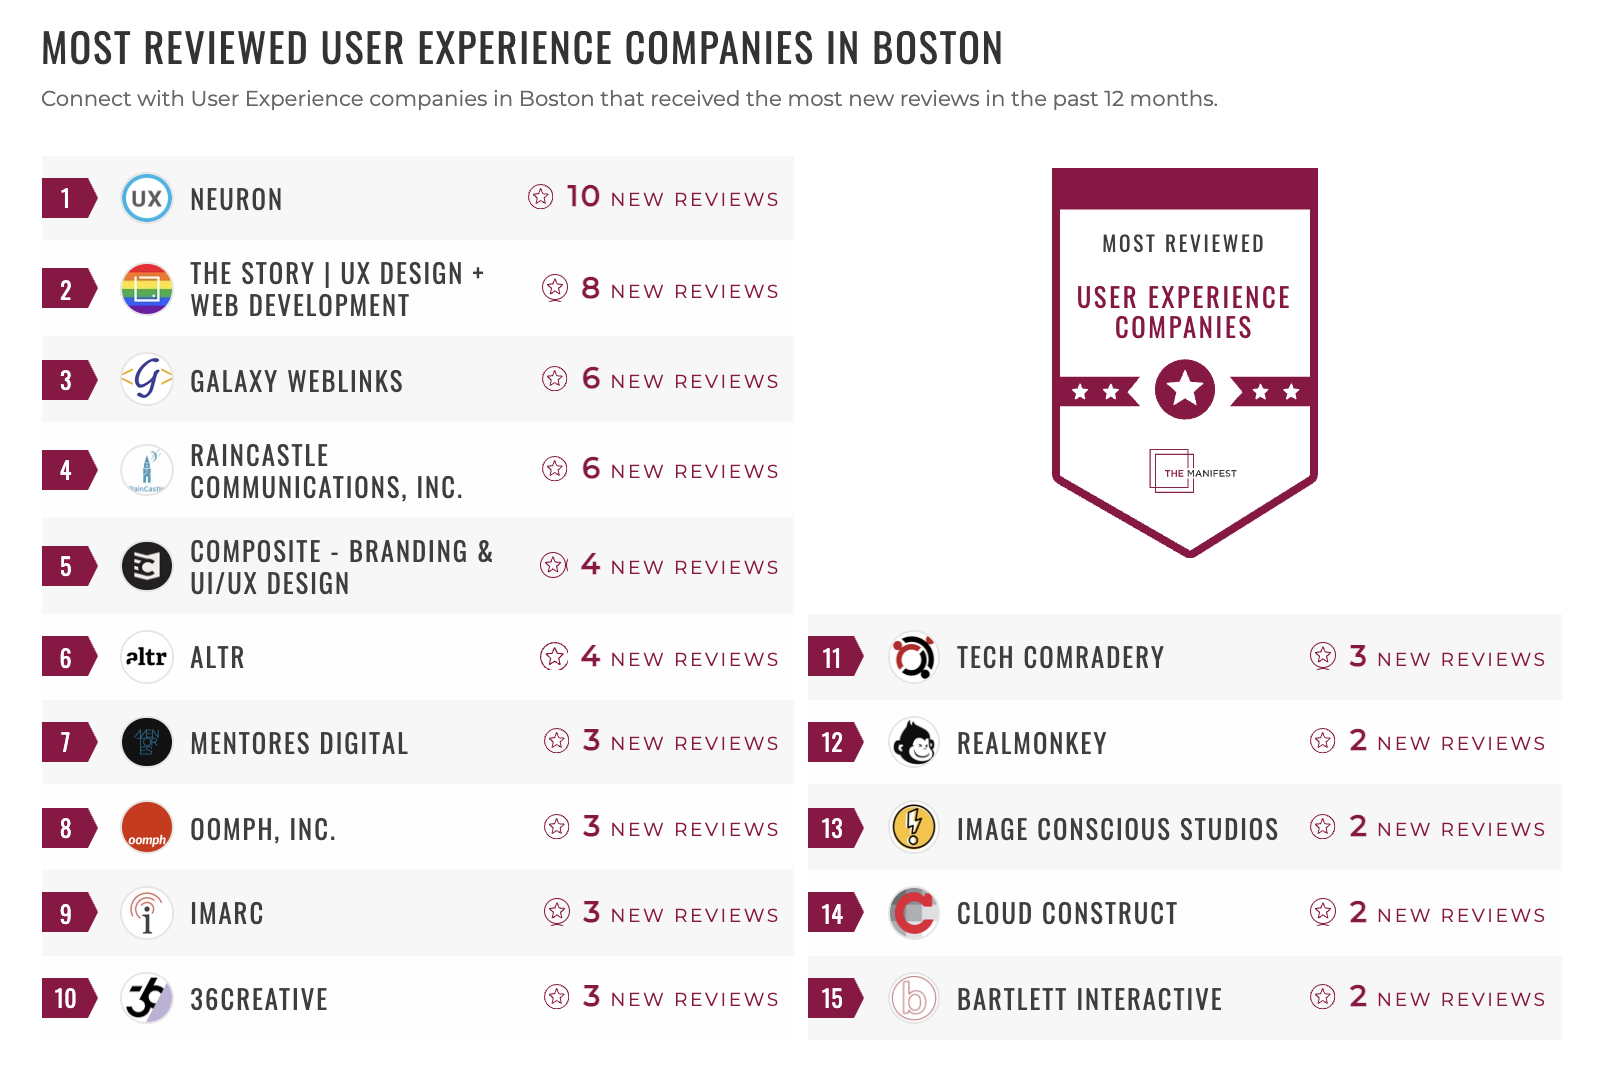 Most Reviewed UX Companies in Boston